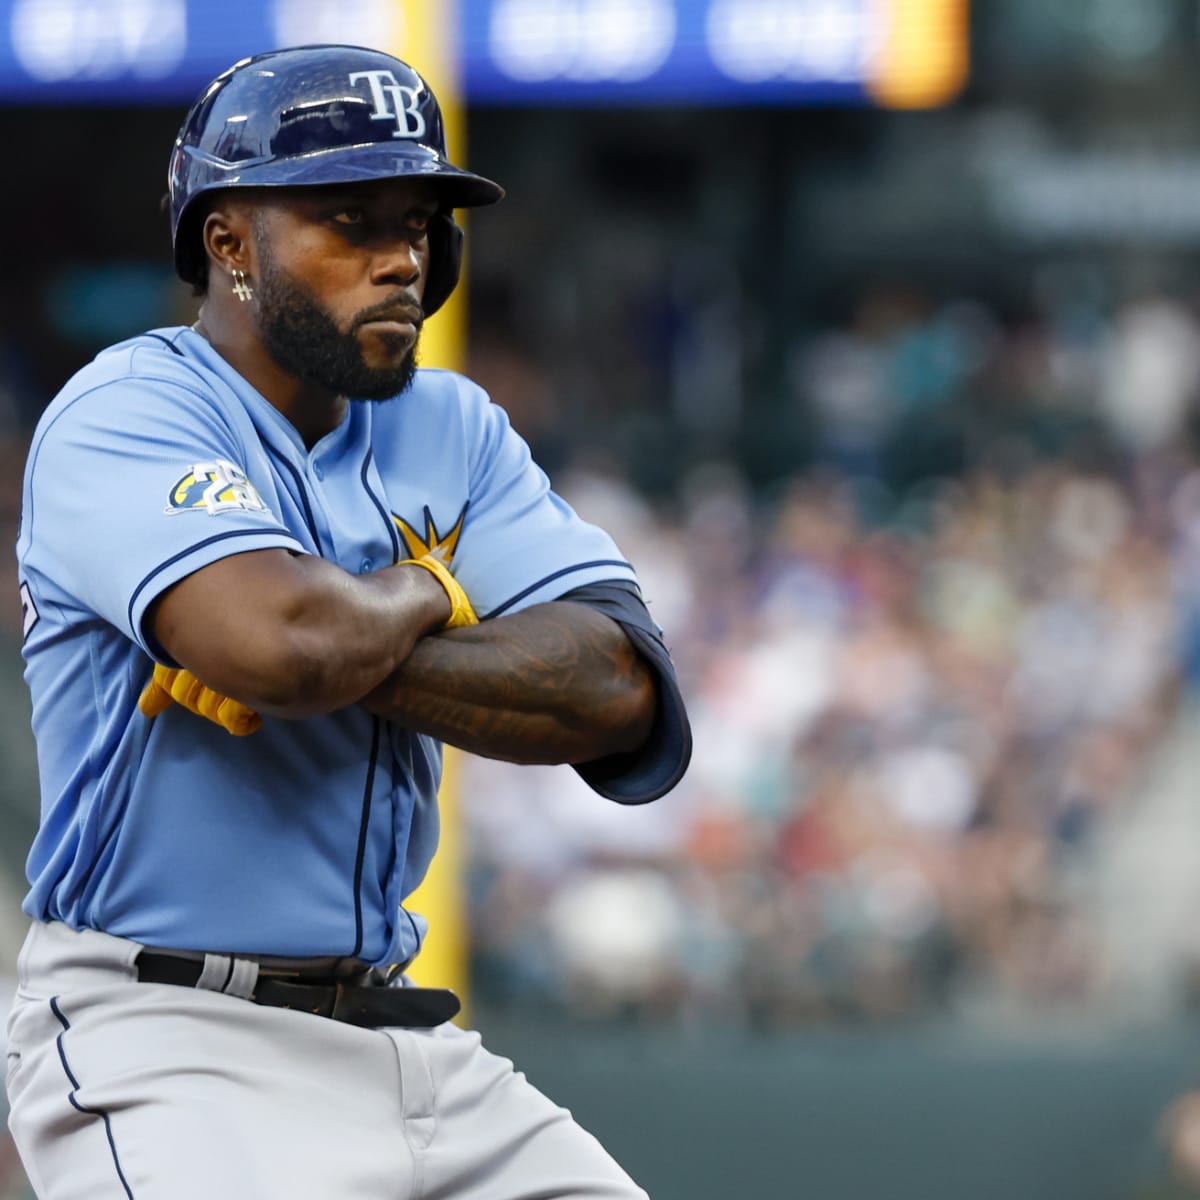 Tampa Bay Rays Slugger Officially Joins Home Run Derby Field - Fastball